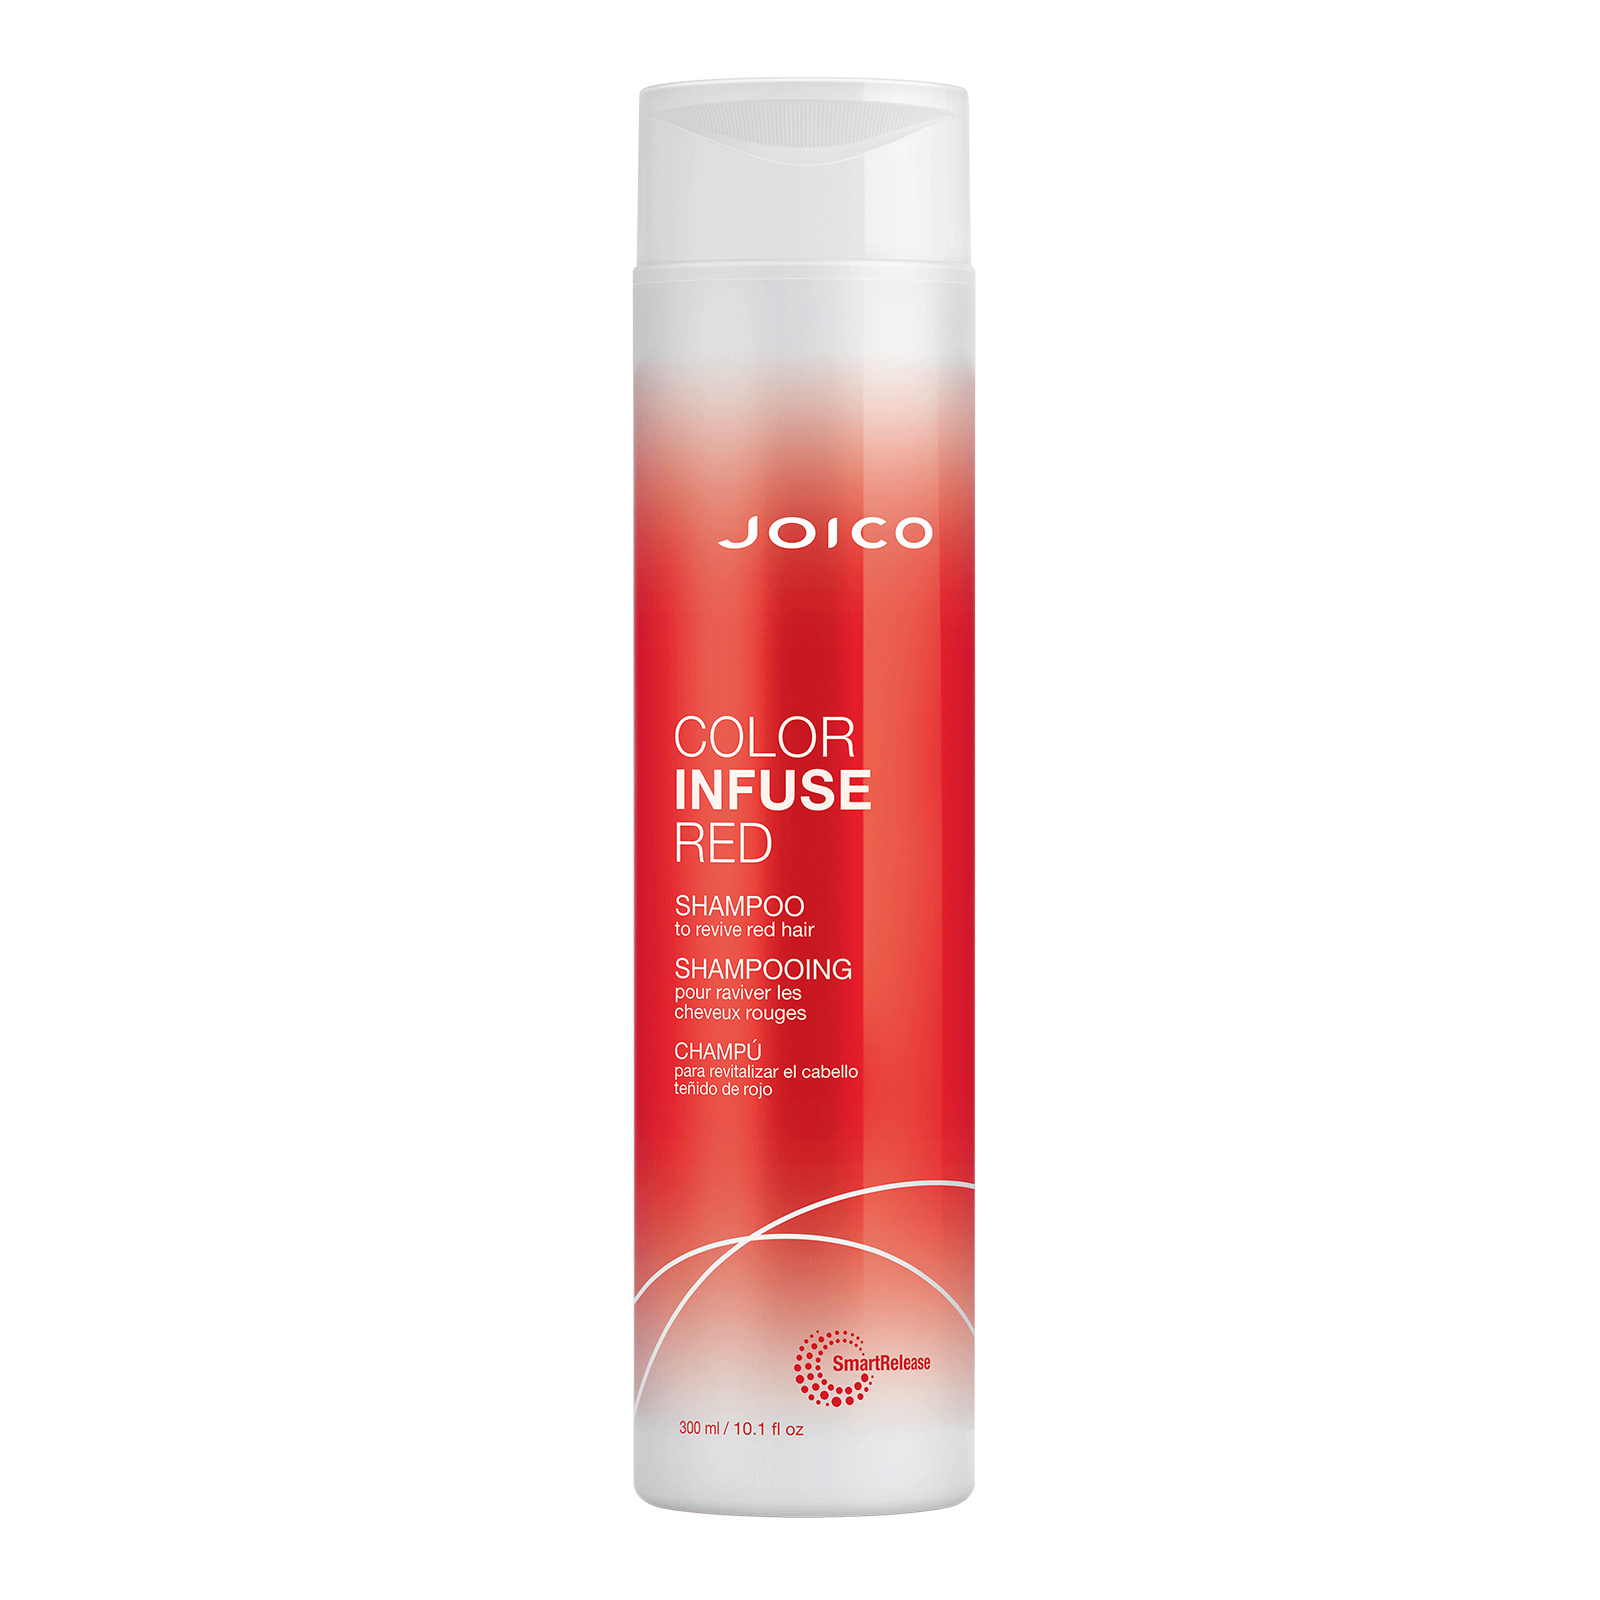 Color Infuse Red Shampoo Joico CosmoProf